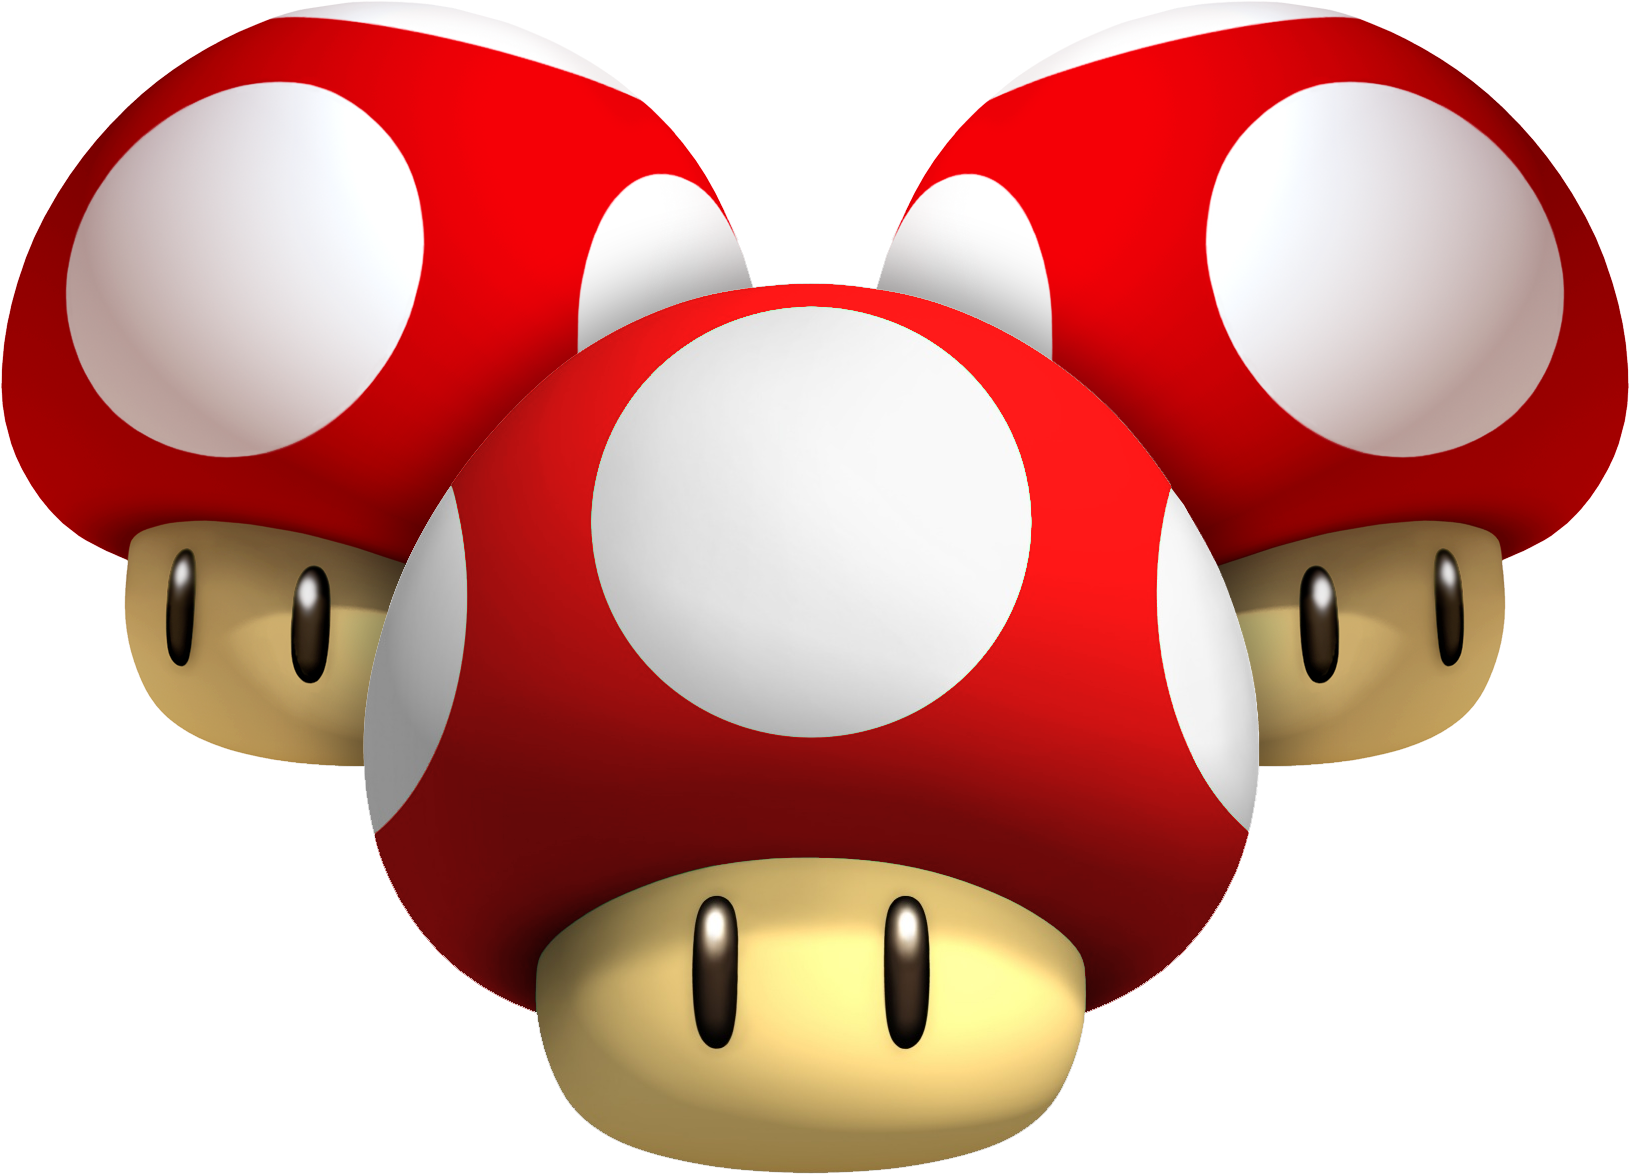 A Group Of Red And White Mushrooms